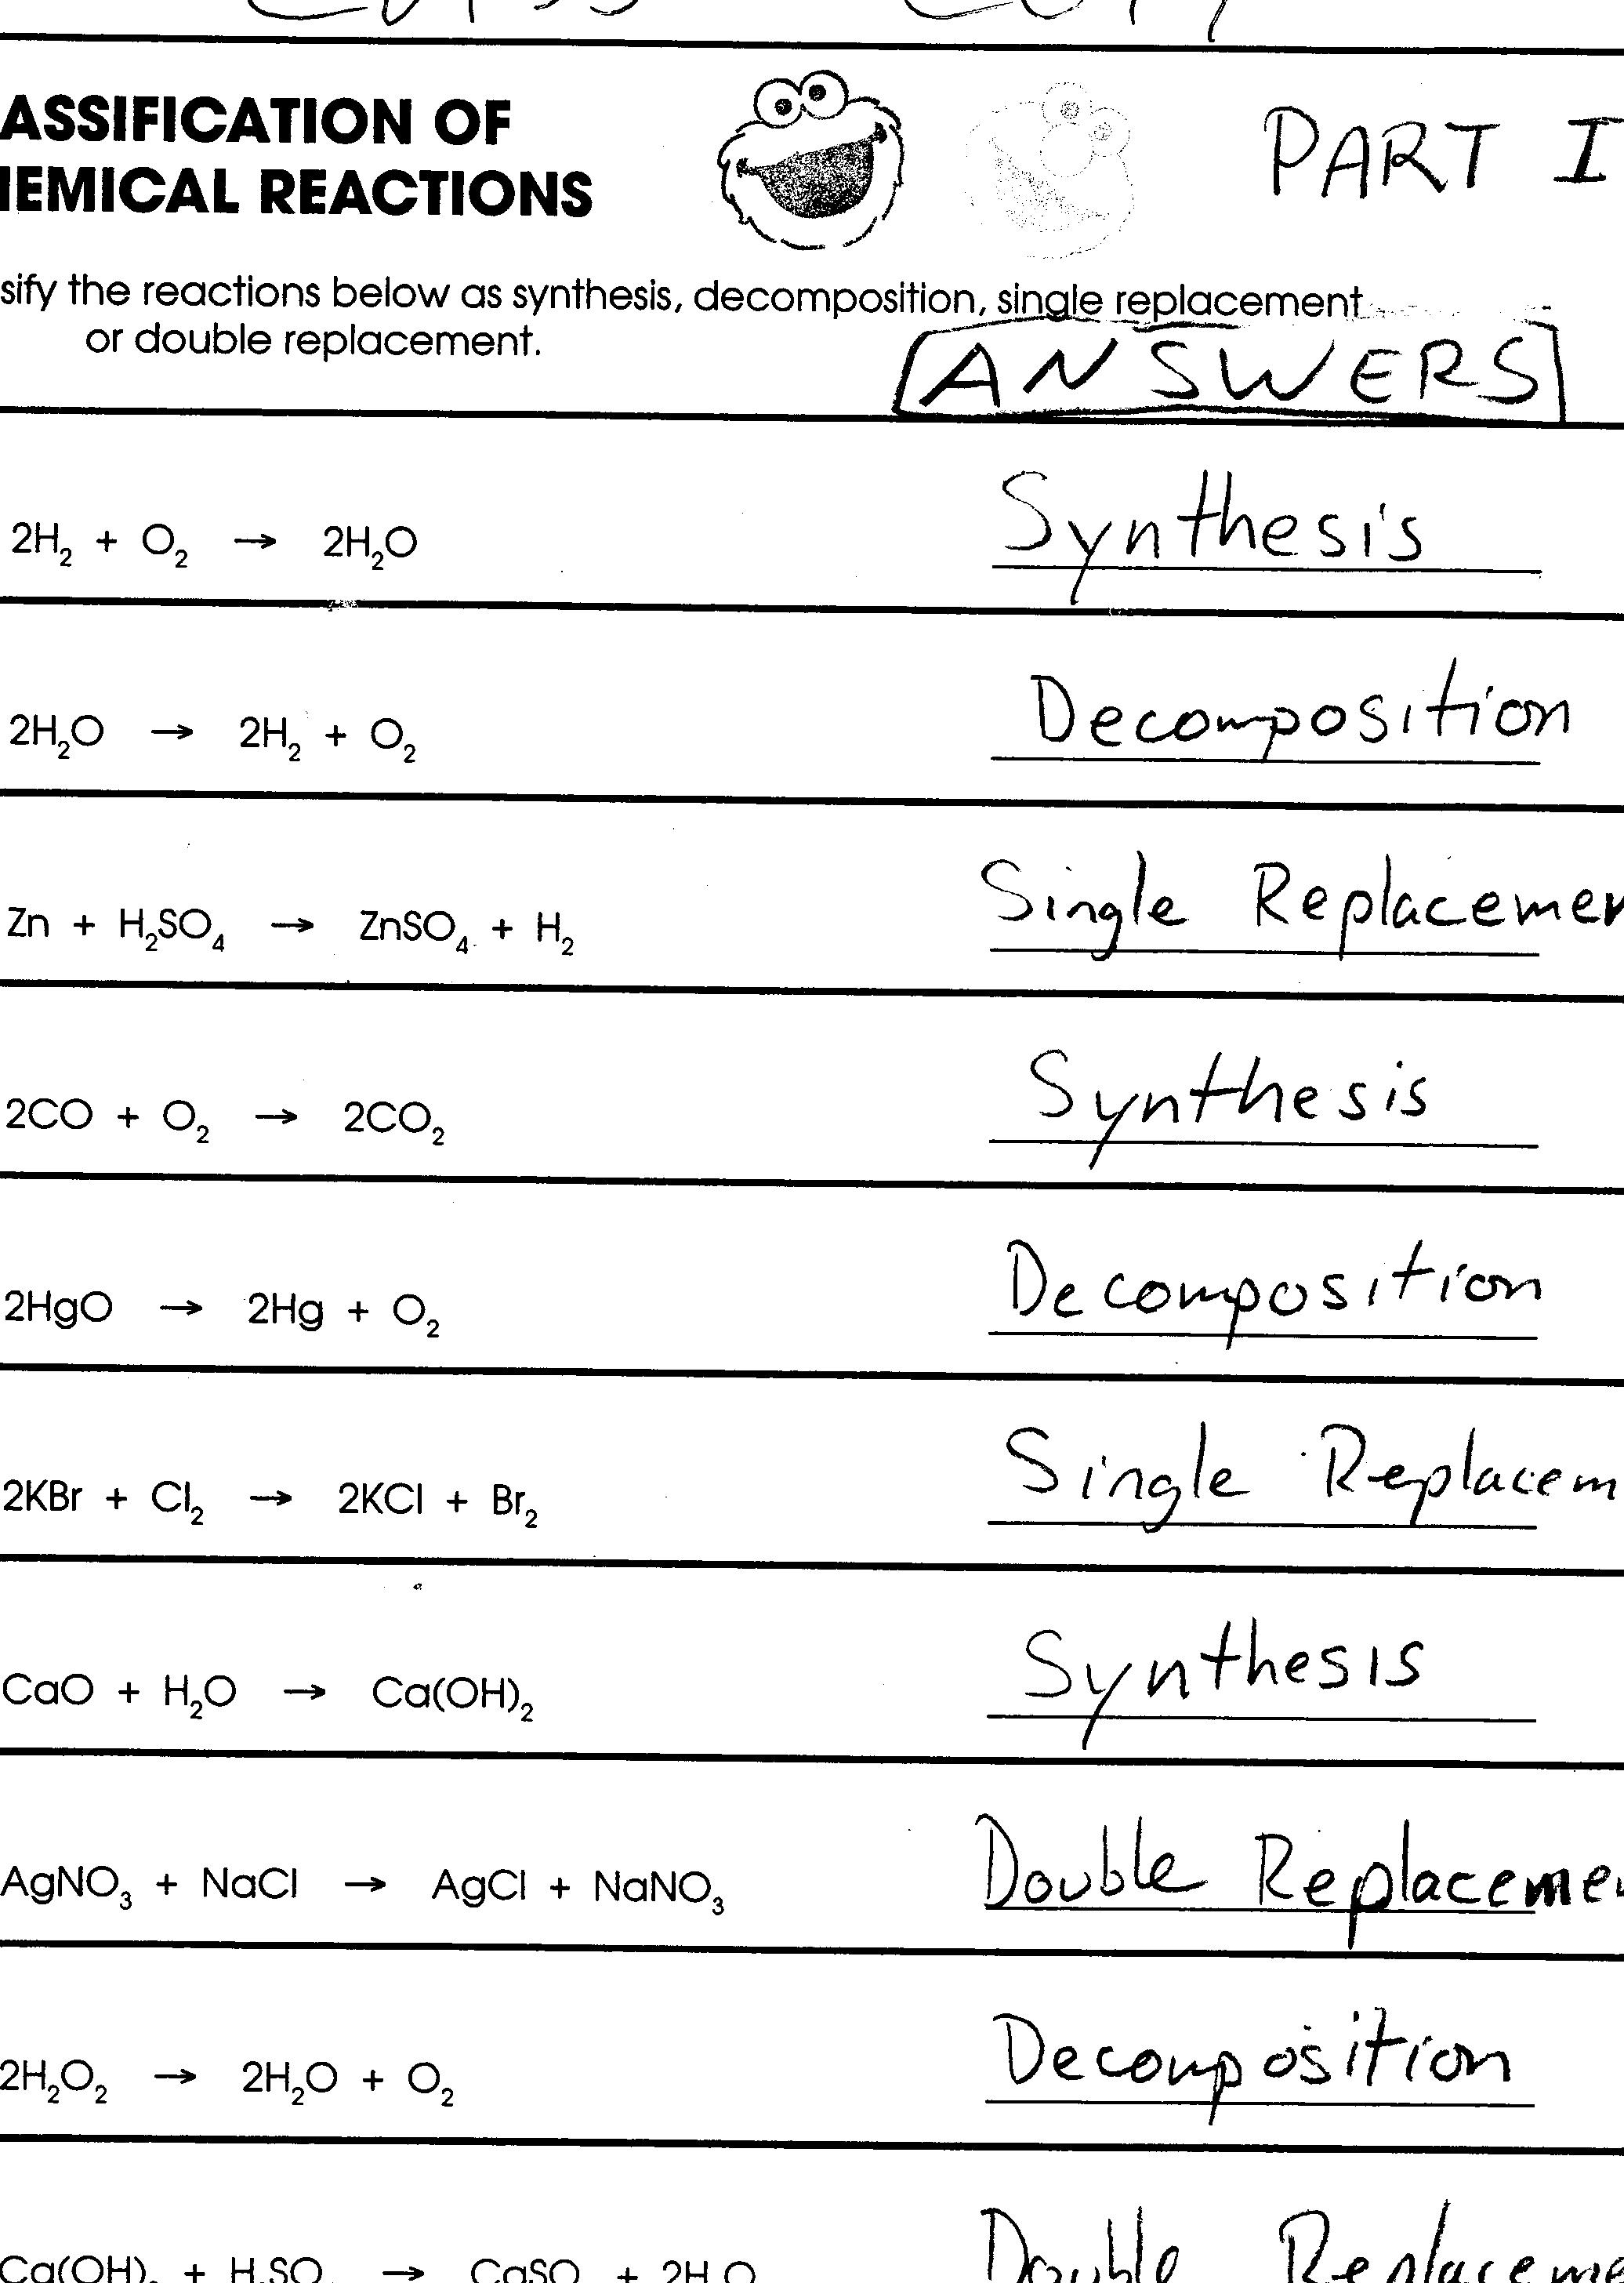 balancing-chemical-equations-and-types-of-reactions-worksheet-answers-49-balancing-chemical